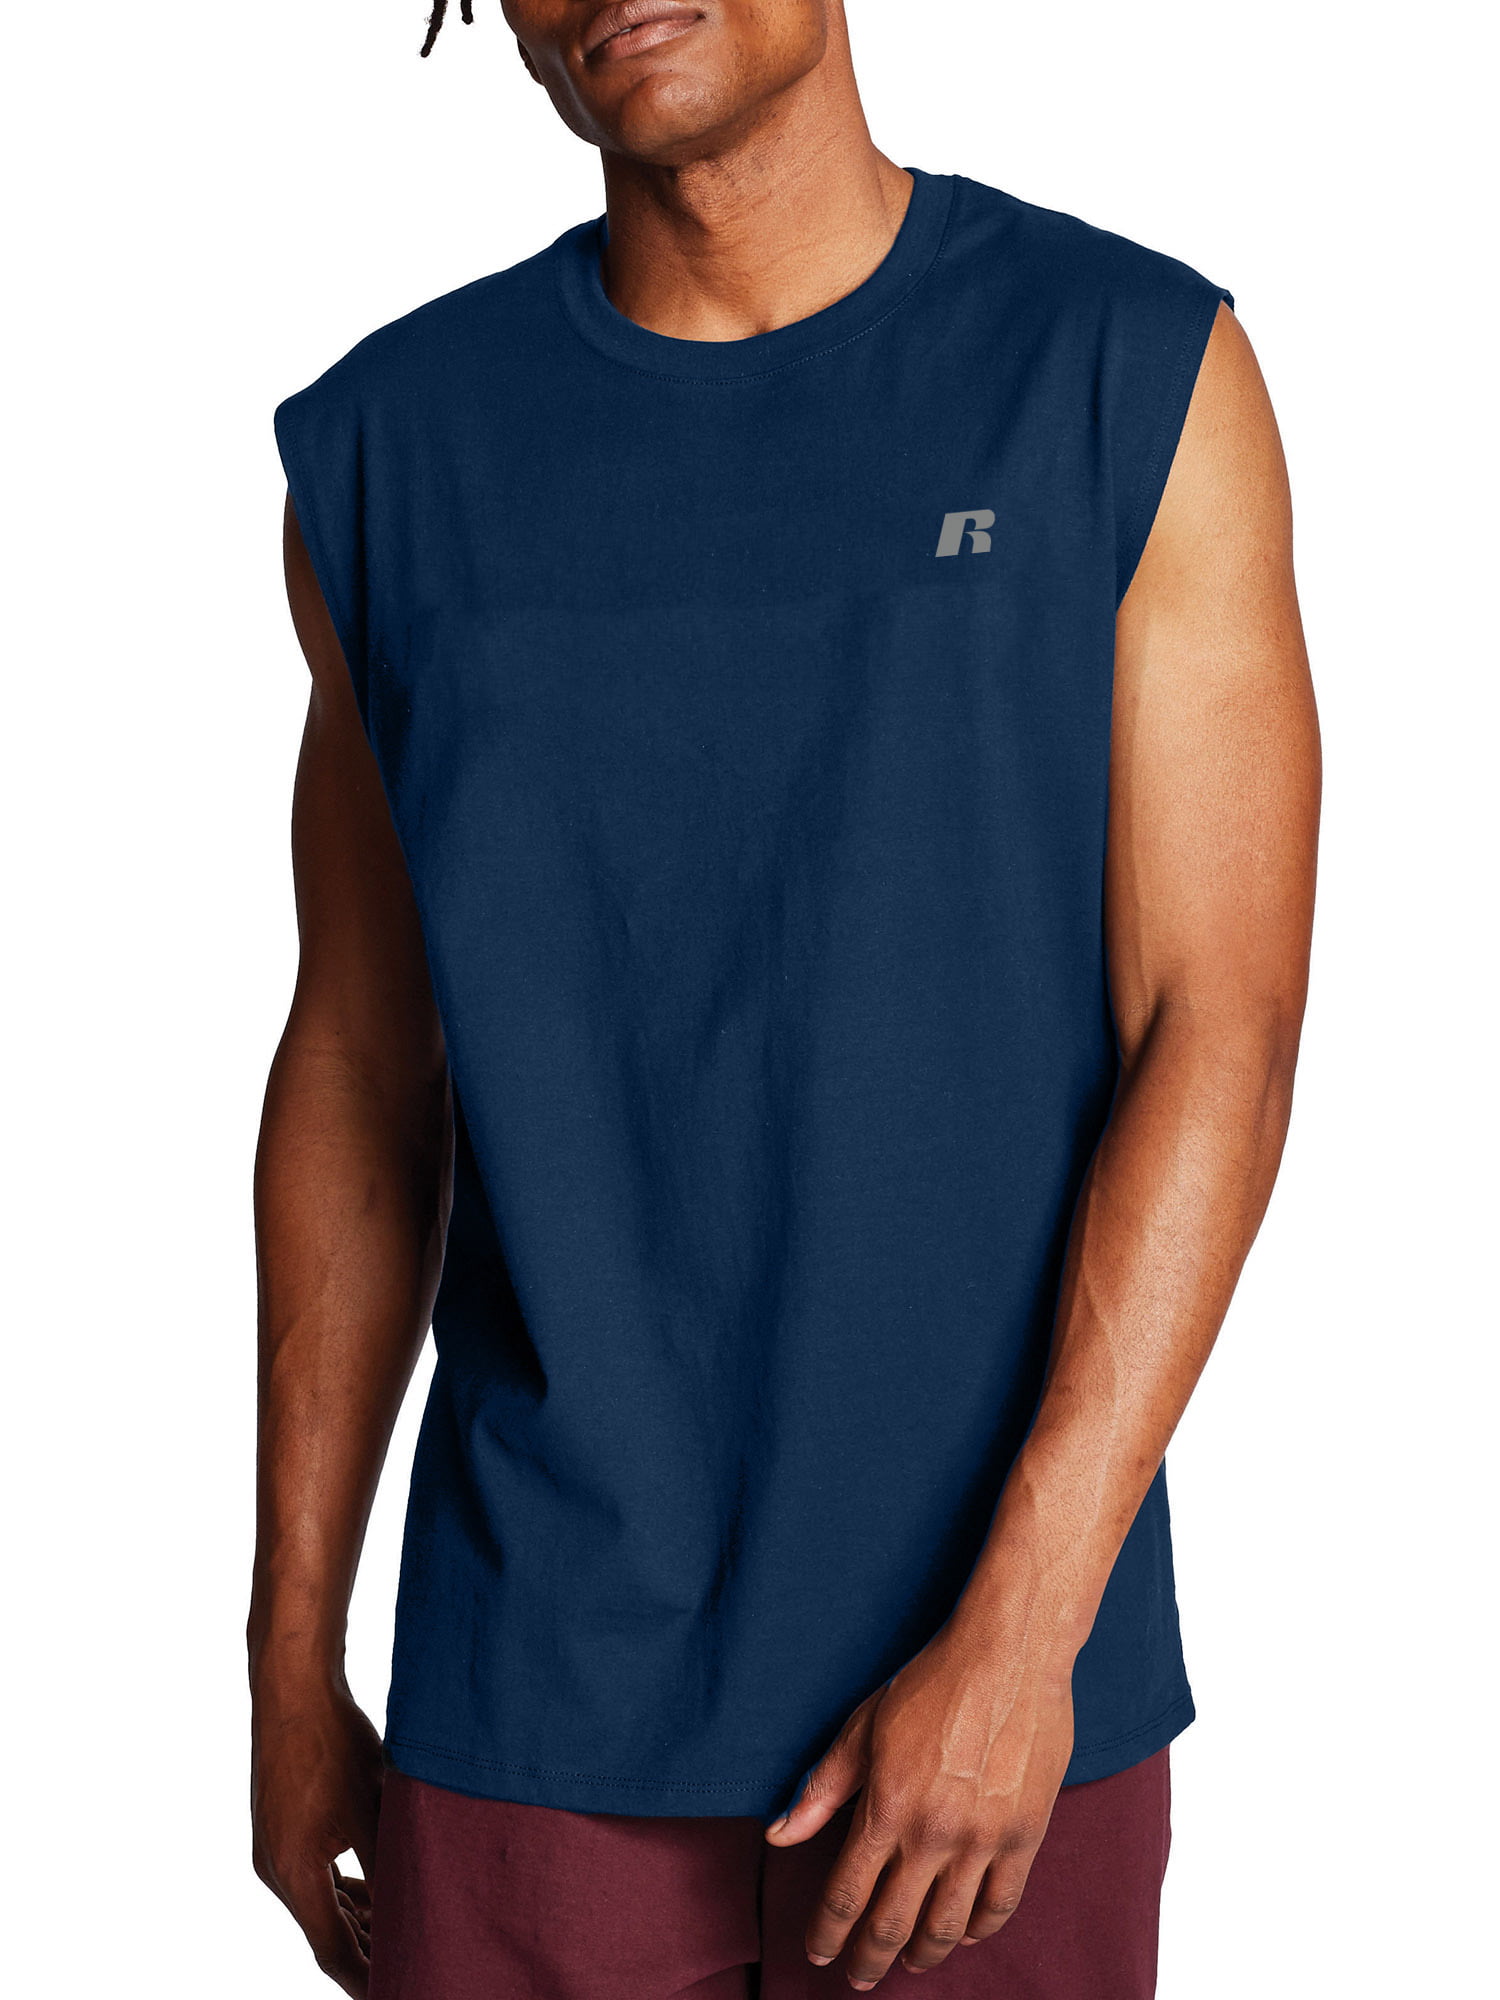 Russell Athletic Men's Big & Tall Dri-Power Muscle Tee shirt, up to Size 6X  - Walmart.com